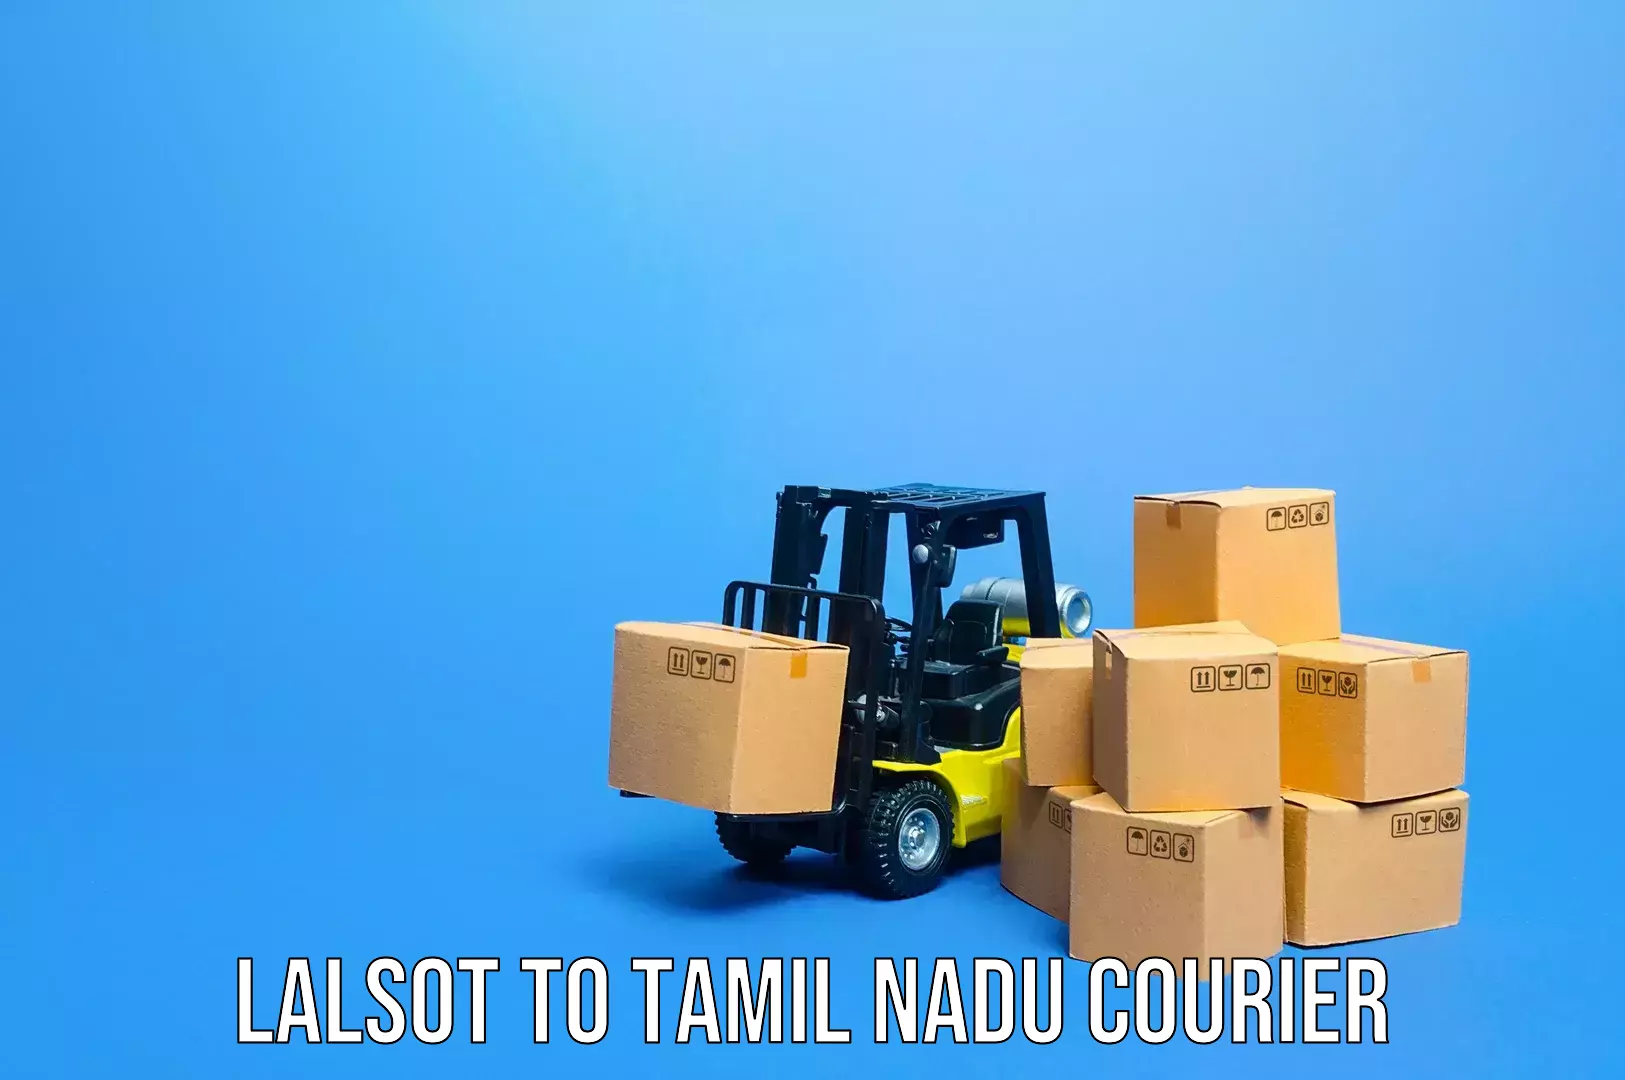 Luggage shipping consultation Lalsot to Chennai Port